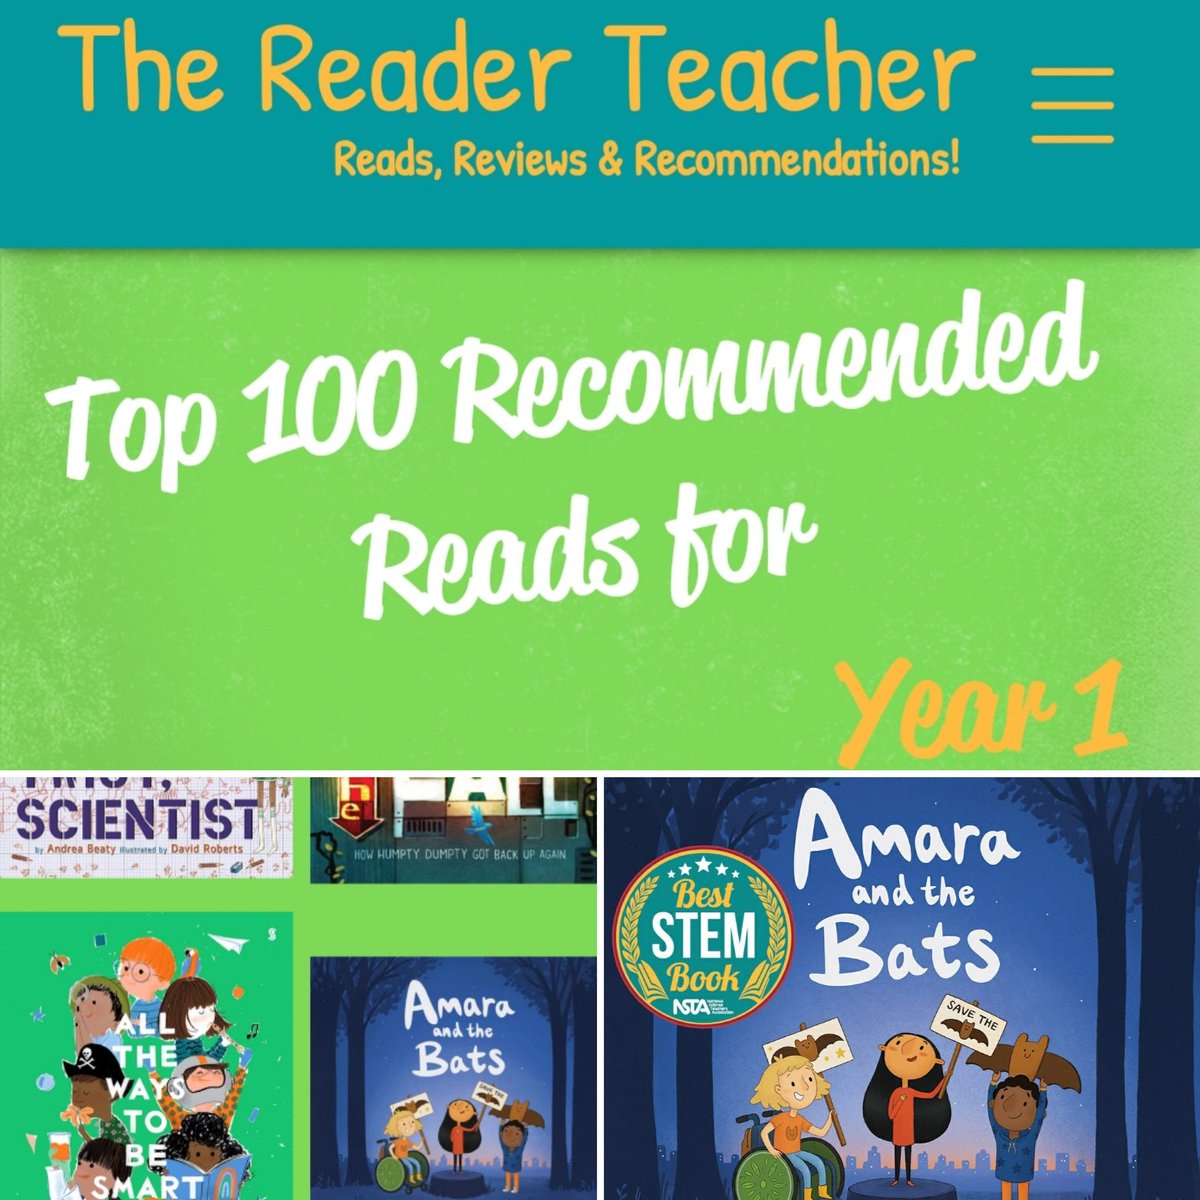 So chuffed #AmaraAndTheBats is in @MrEPrimary Top 100 Recommended Reads for Year 1 on: thereaderteacher.com/year1
☺❤🦇